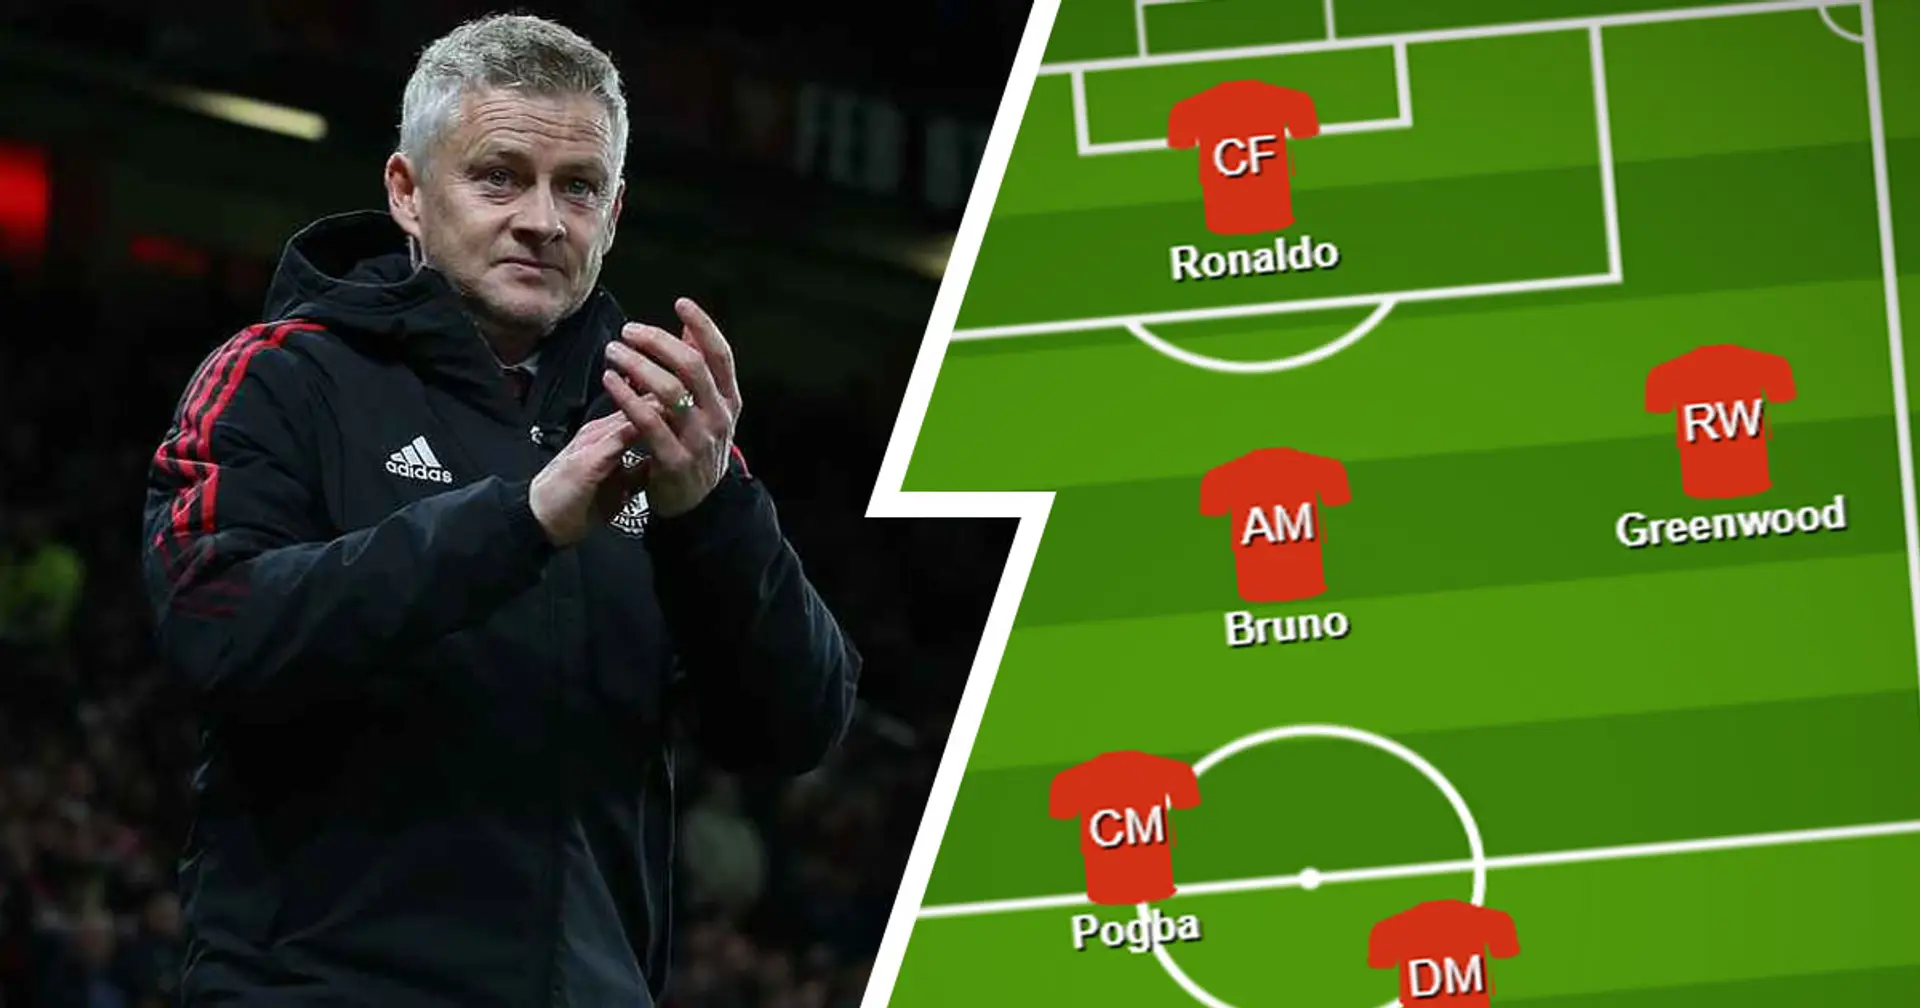 Pogba in pivot, Greenwood as inverted winger & more: Solskjaer's formation in Villarreal win explained